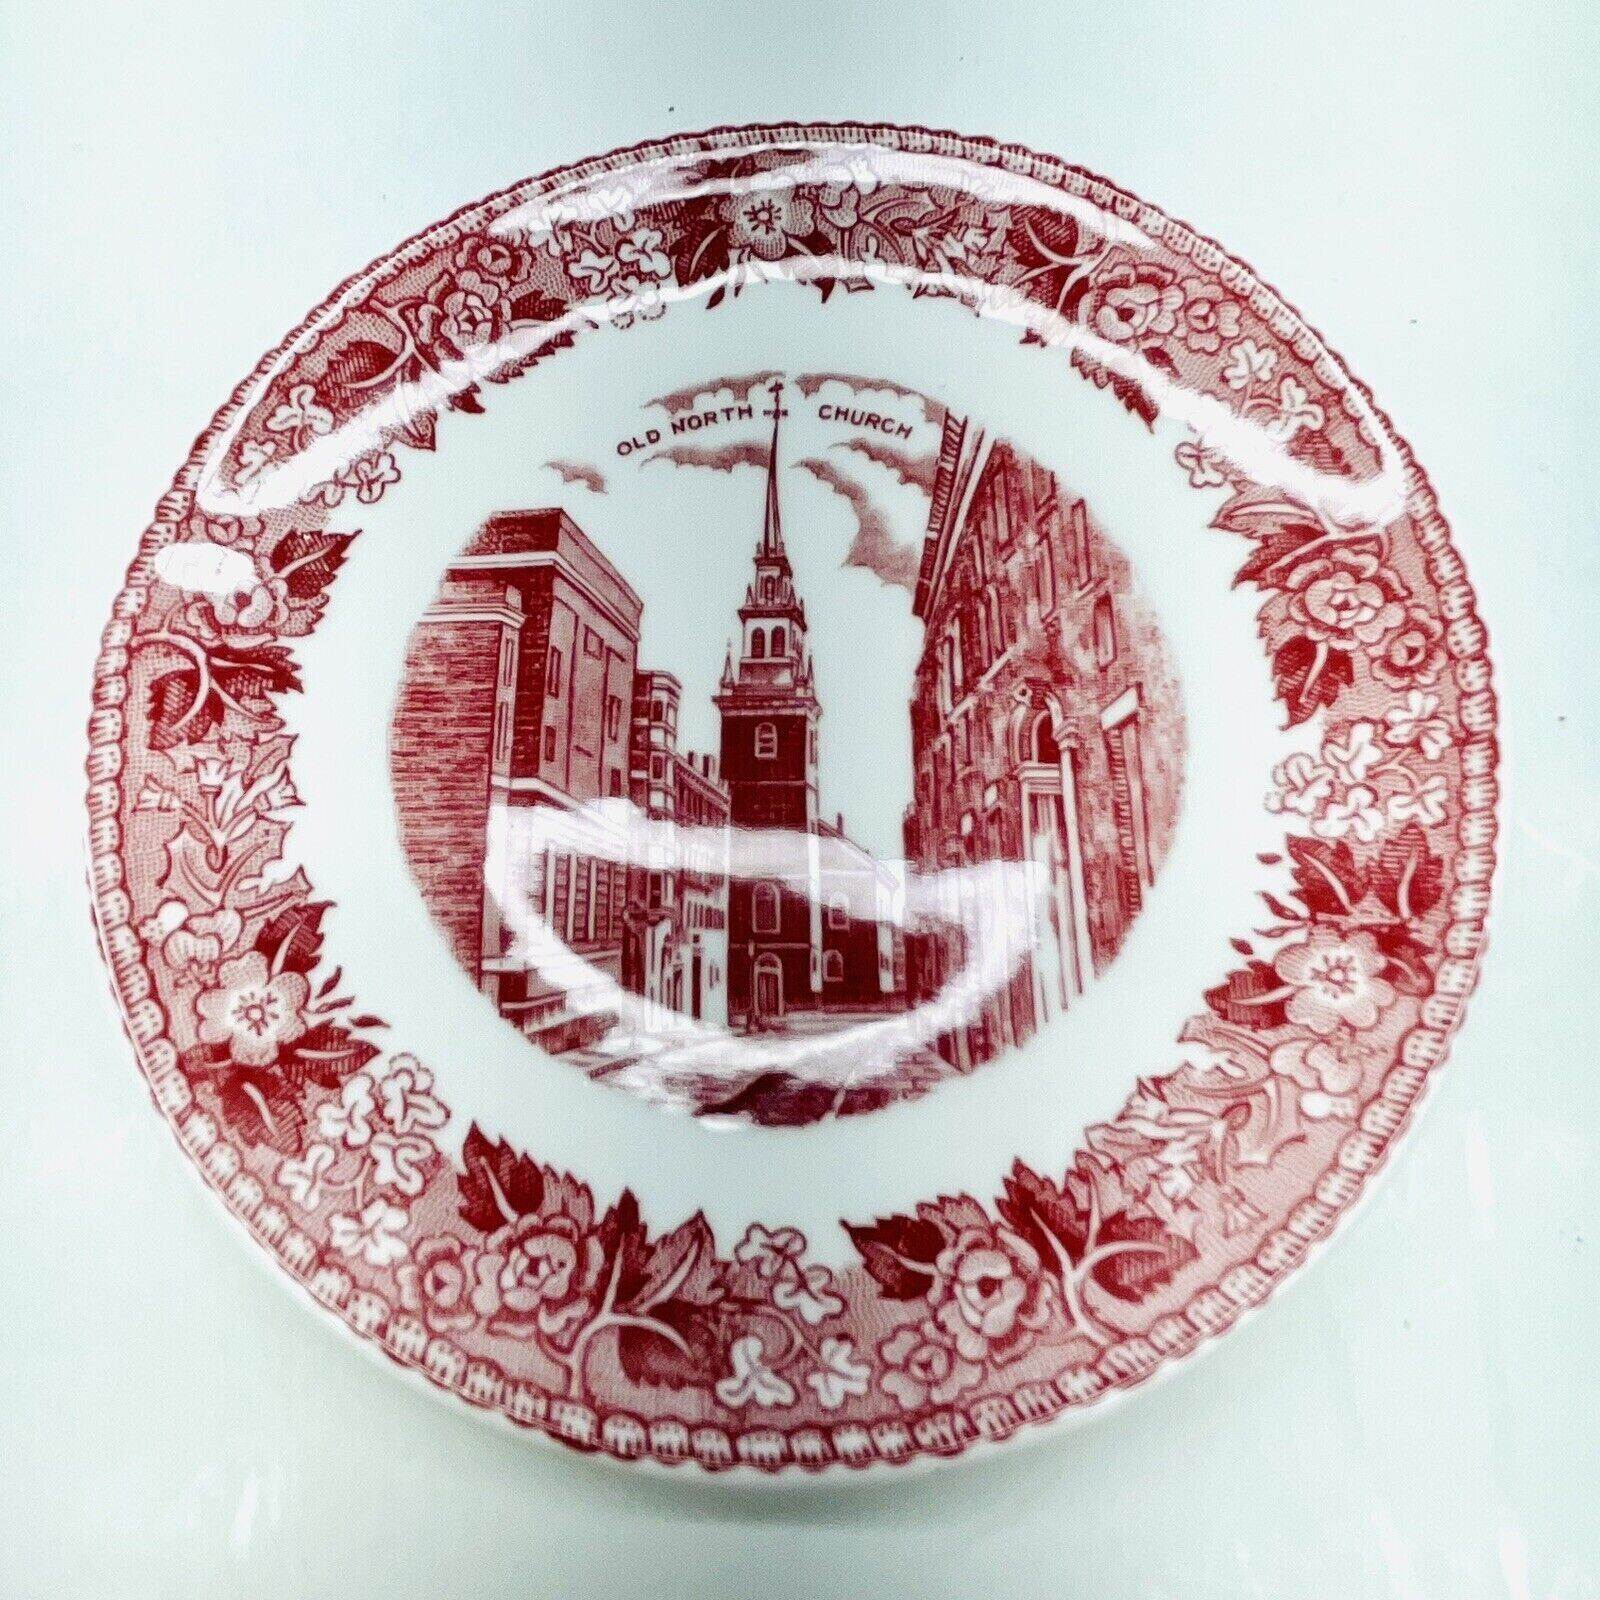 VTG Pink Staffordshire England Plate Commemorative For Boston Old North Church